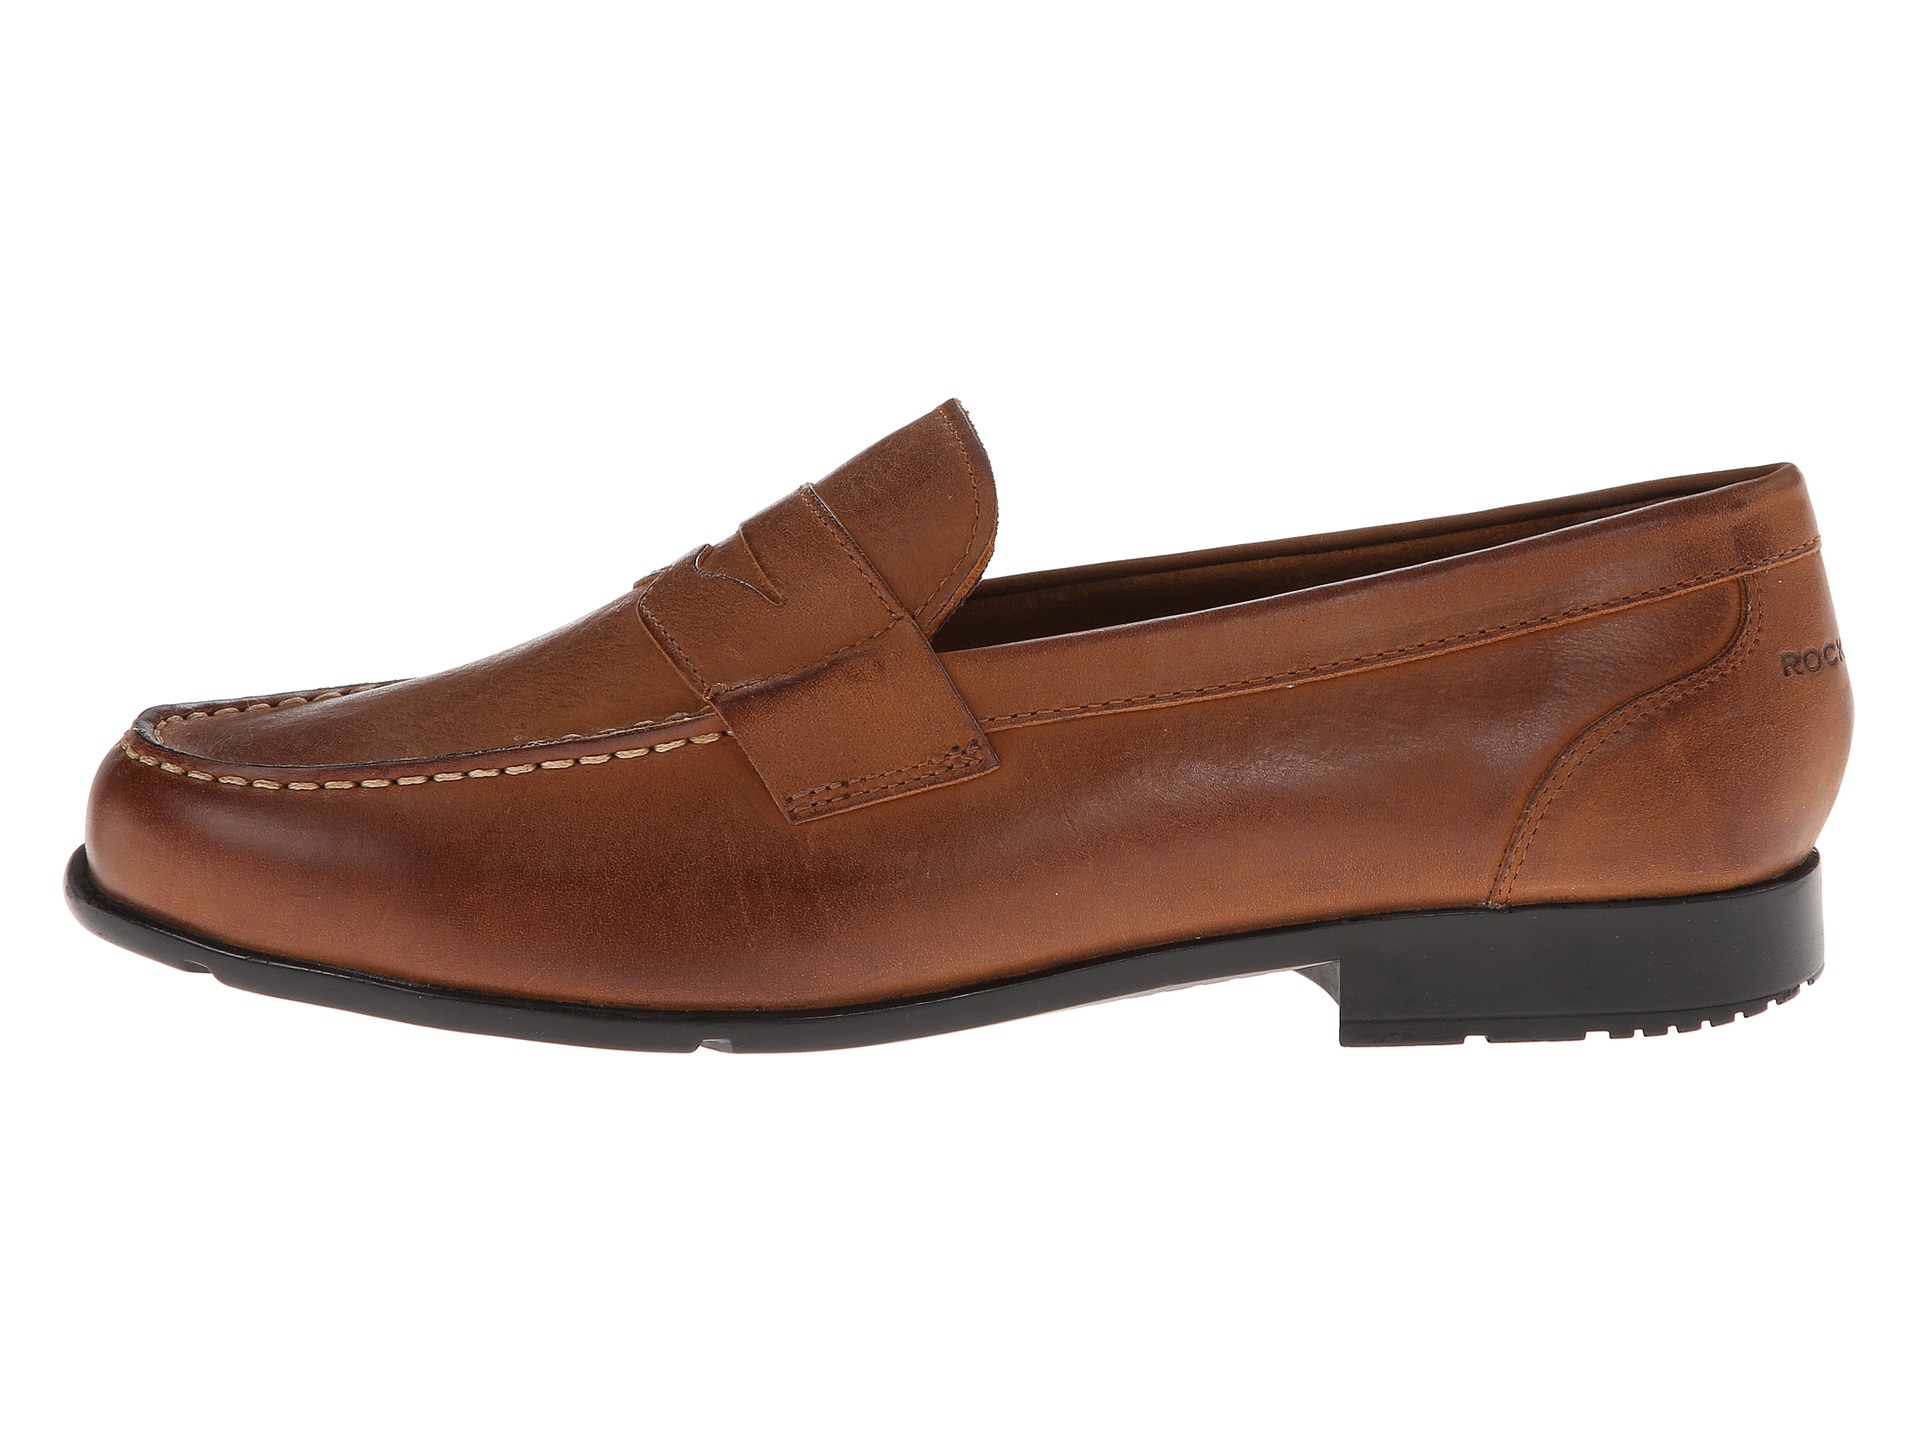 Rockport Classic Loafer Lite Penny Caramel - Zappos.com Free Shipping ...